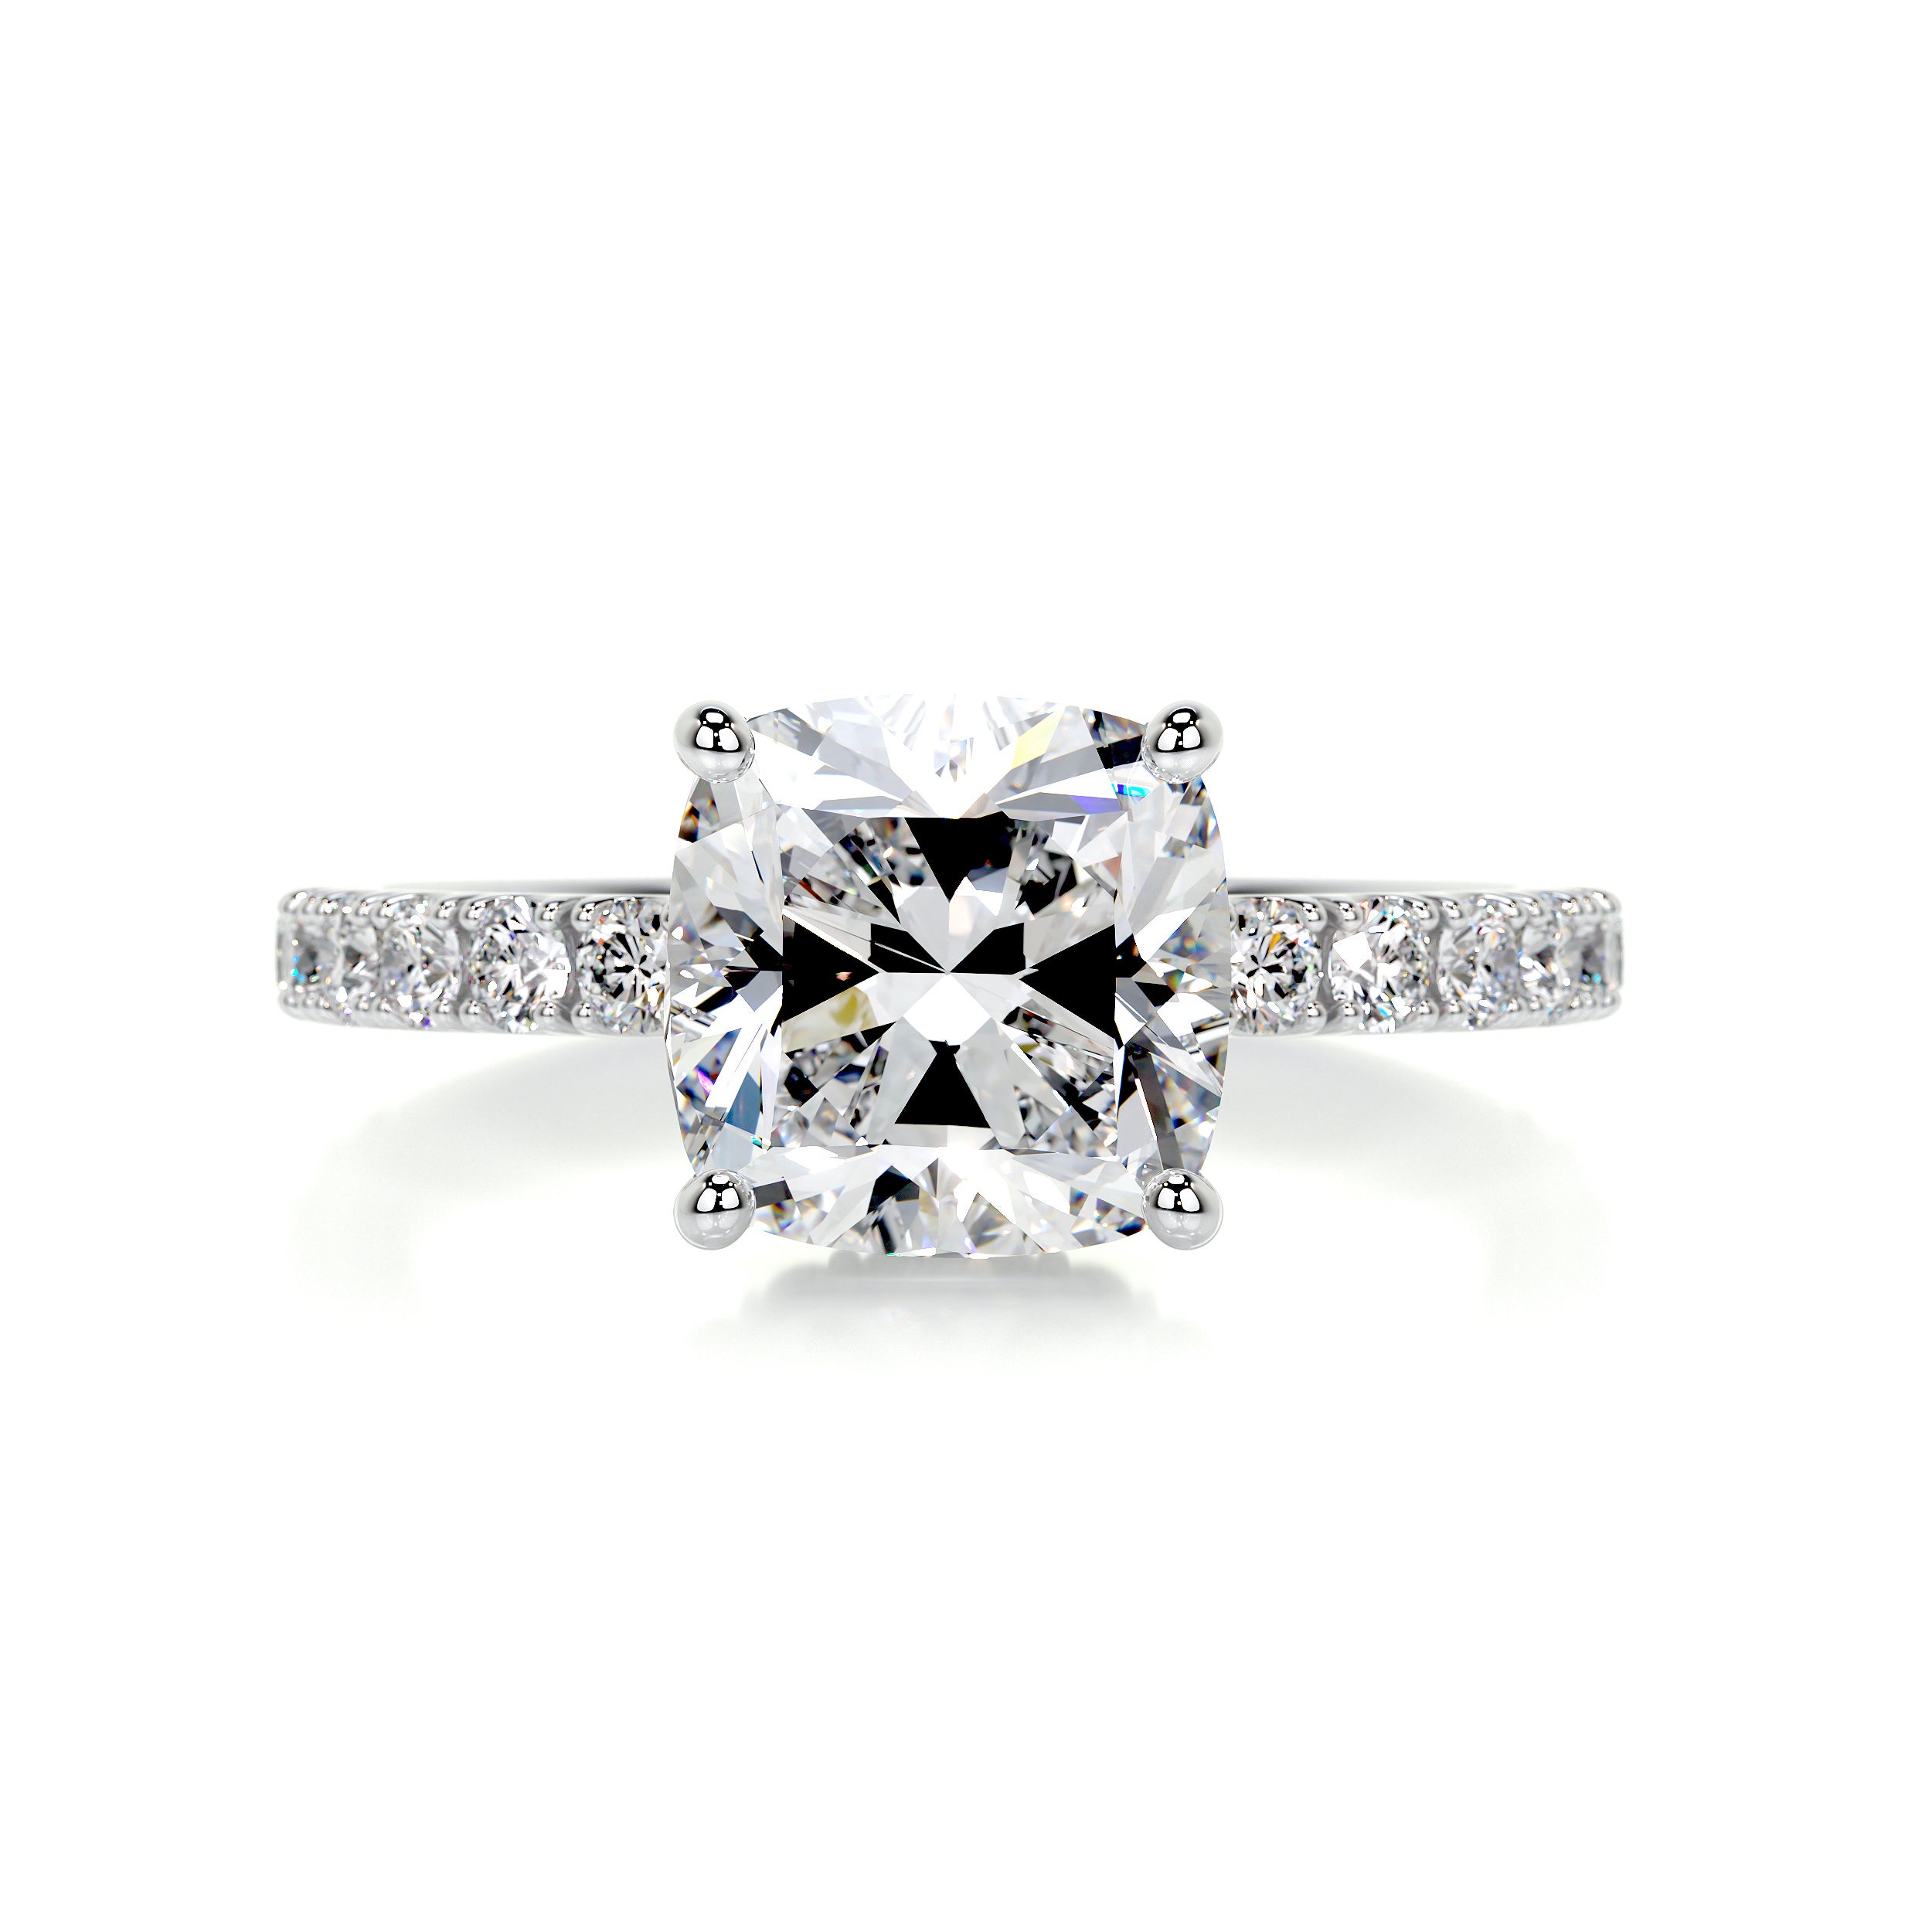 The Bree Engagement Ring   (2.5 Carat) -14K White Gold